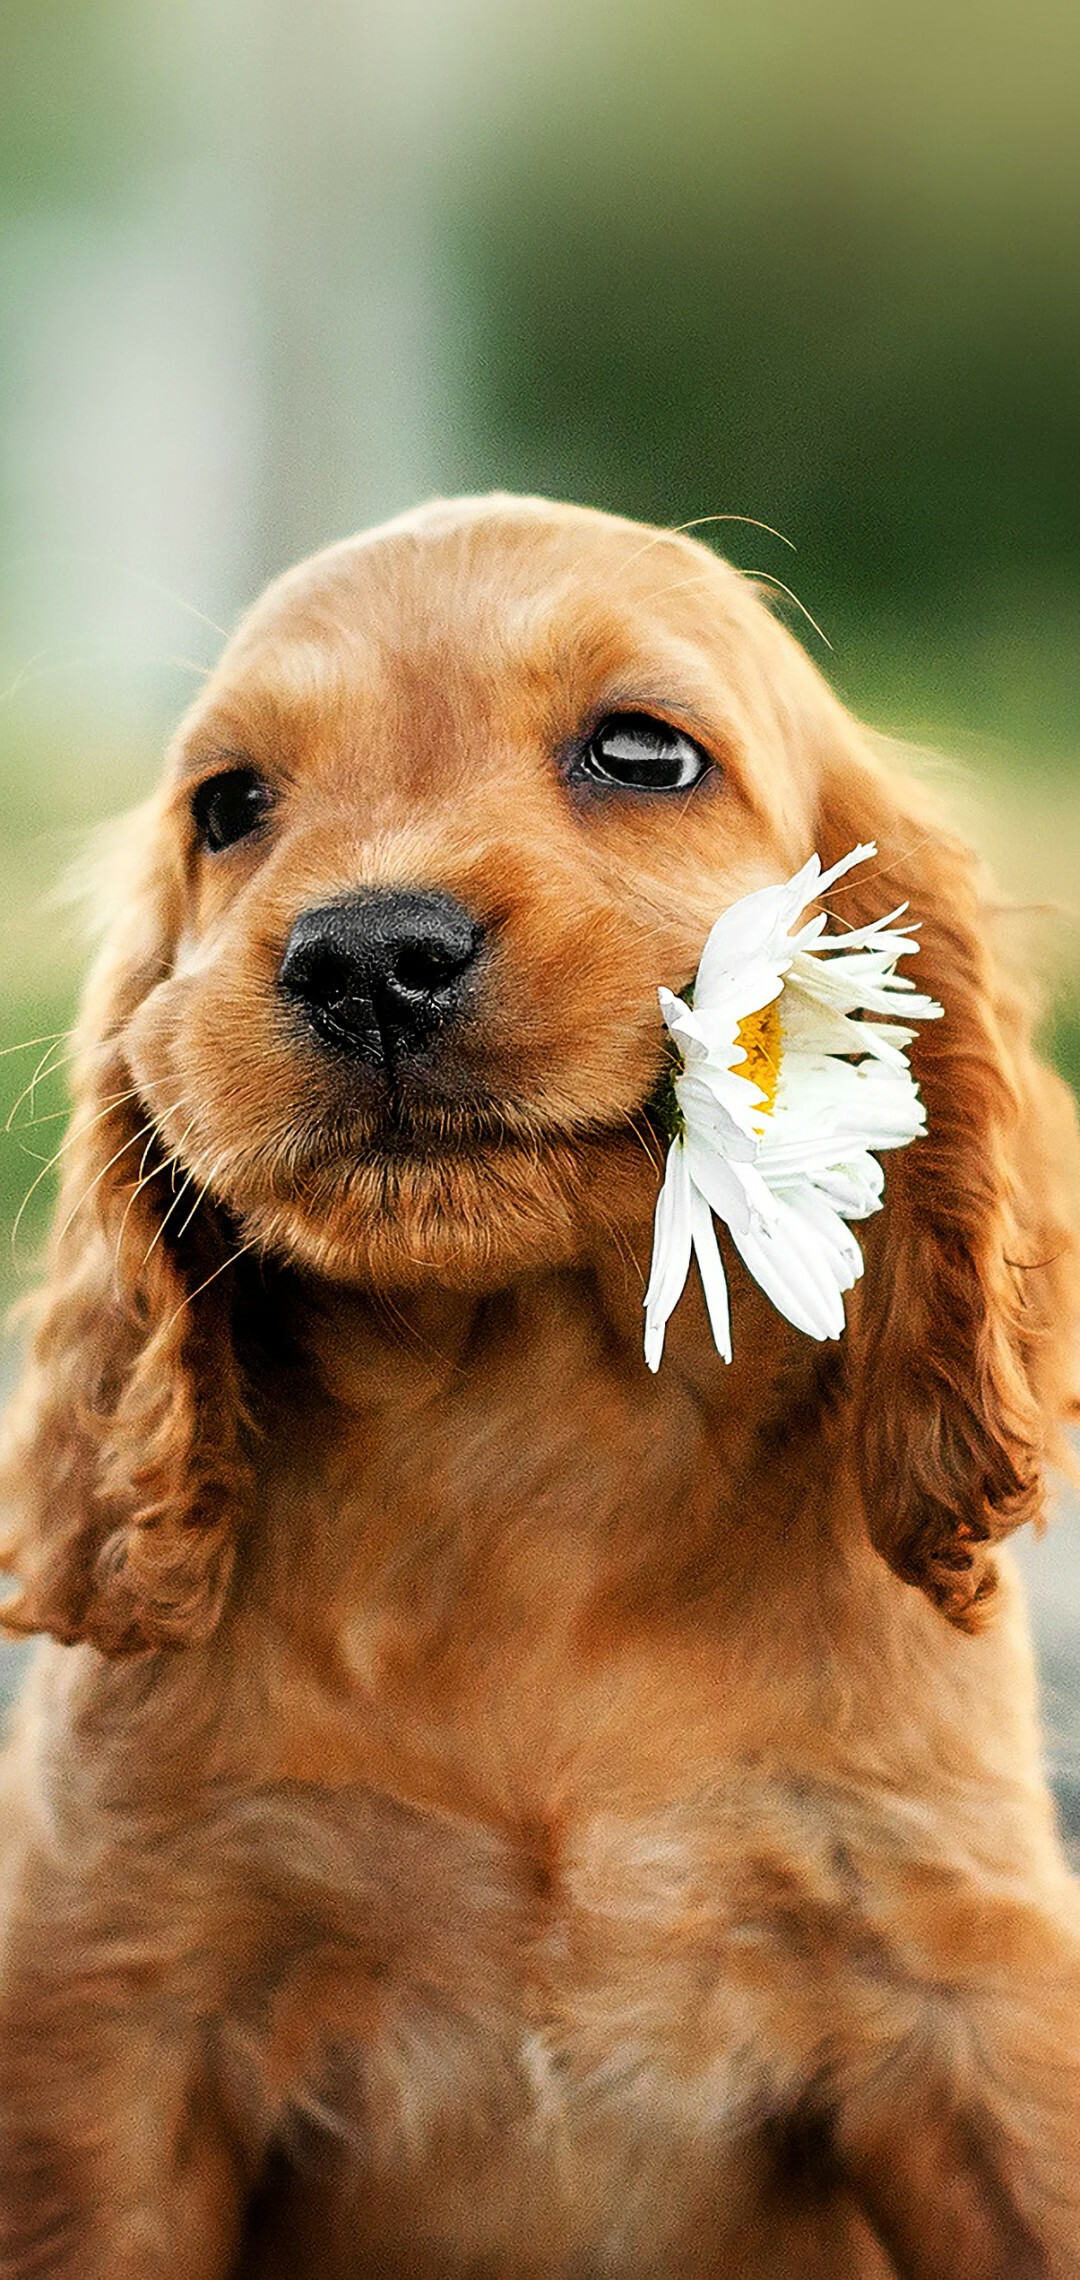 Puppy: One of the first domesticated animals, Canis familiaris. 1080x2280 HD Wallpaper.